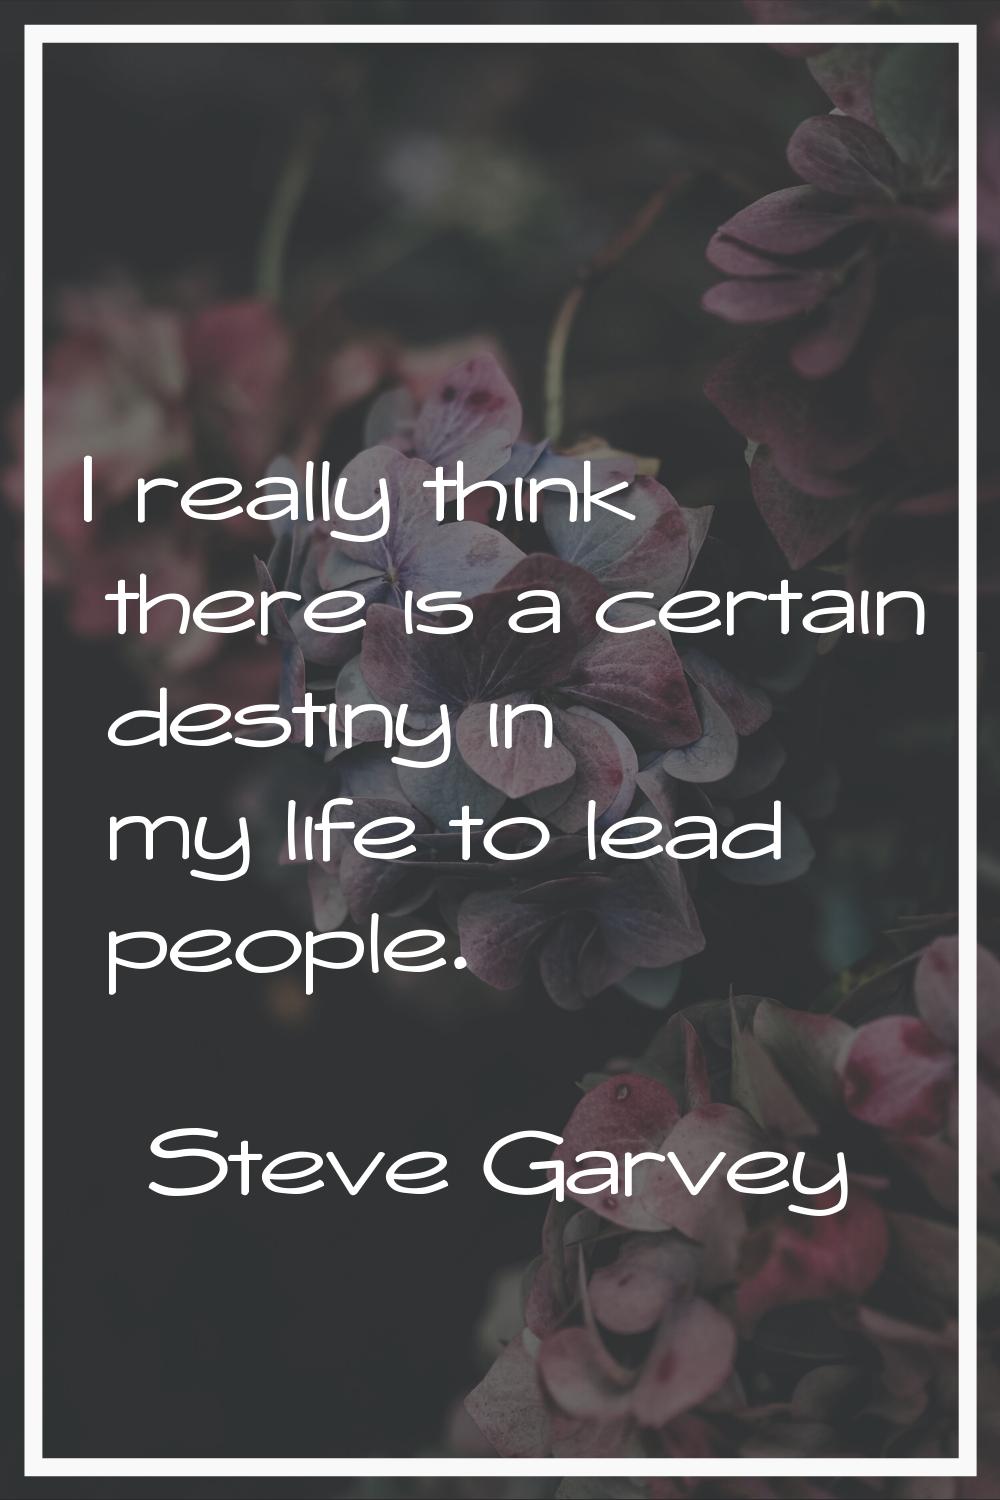 I really think there is a certain destiny in my life to lead people.